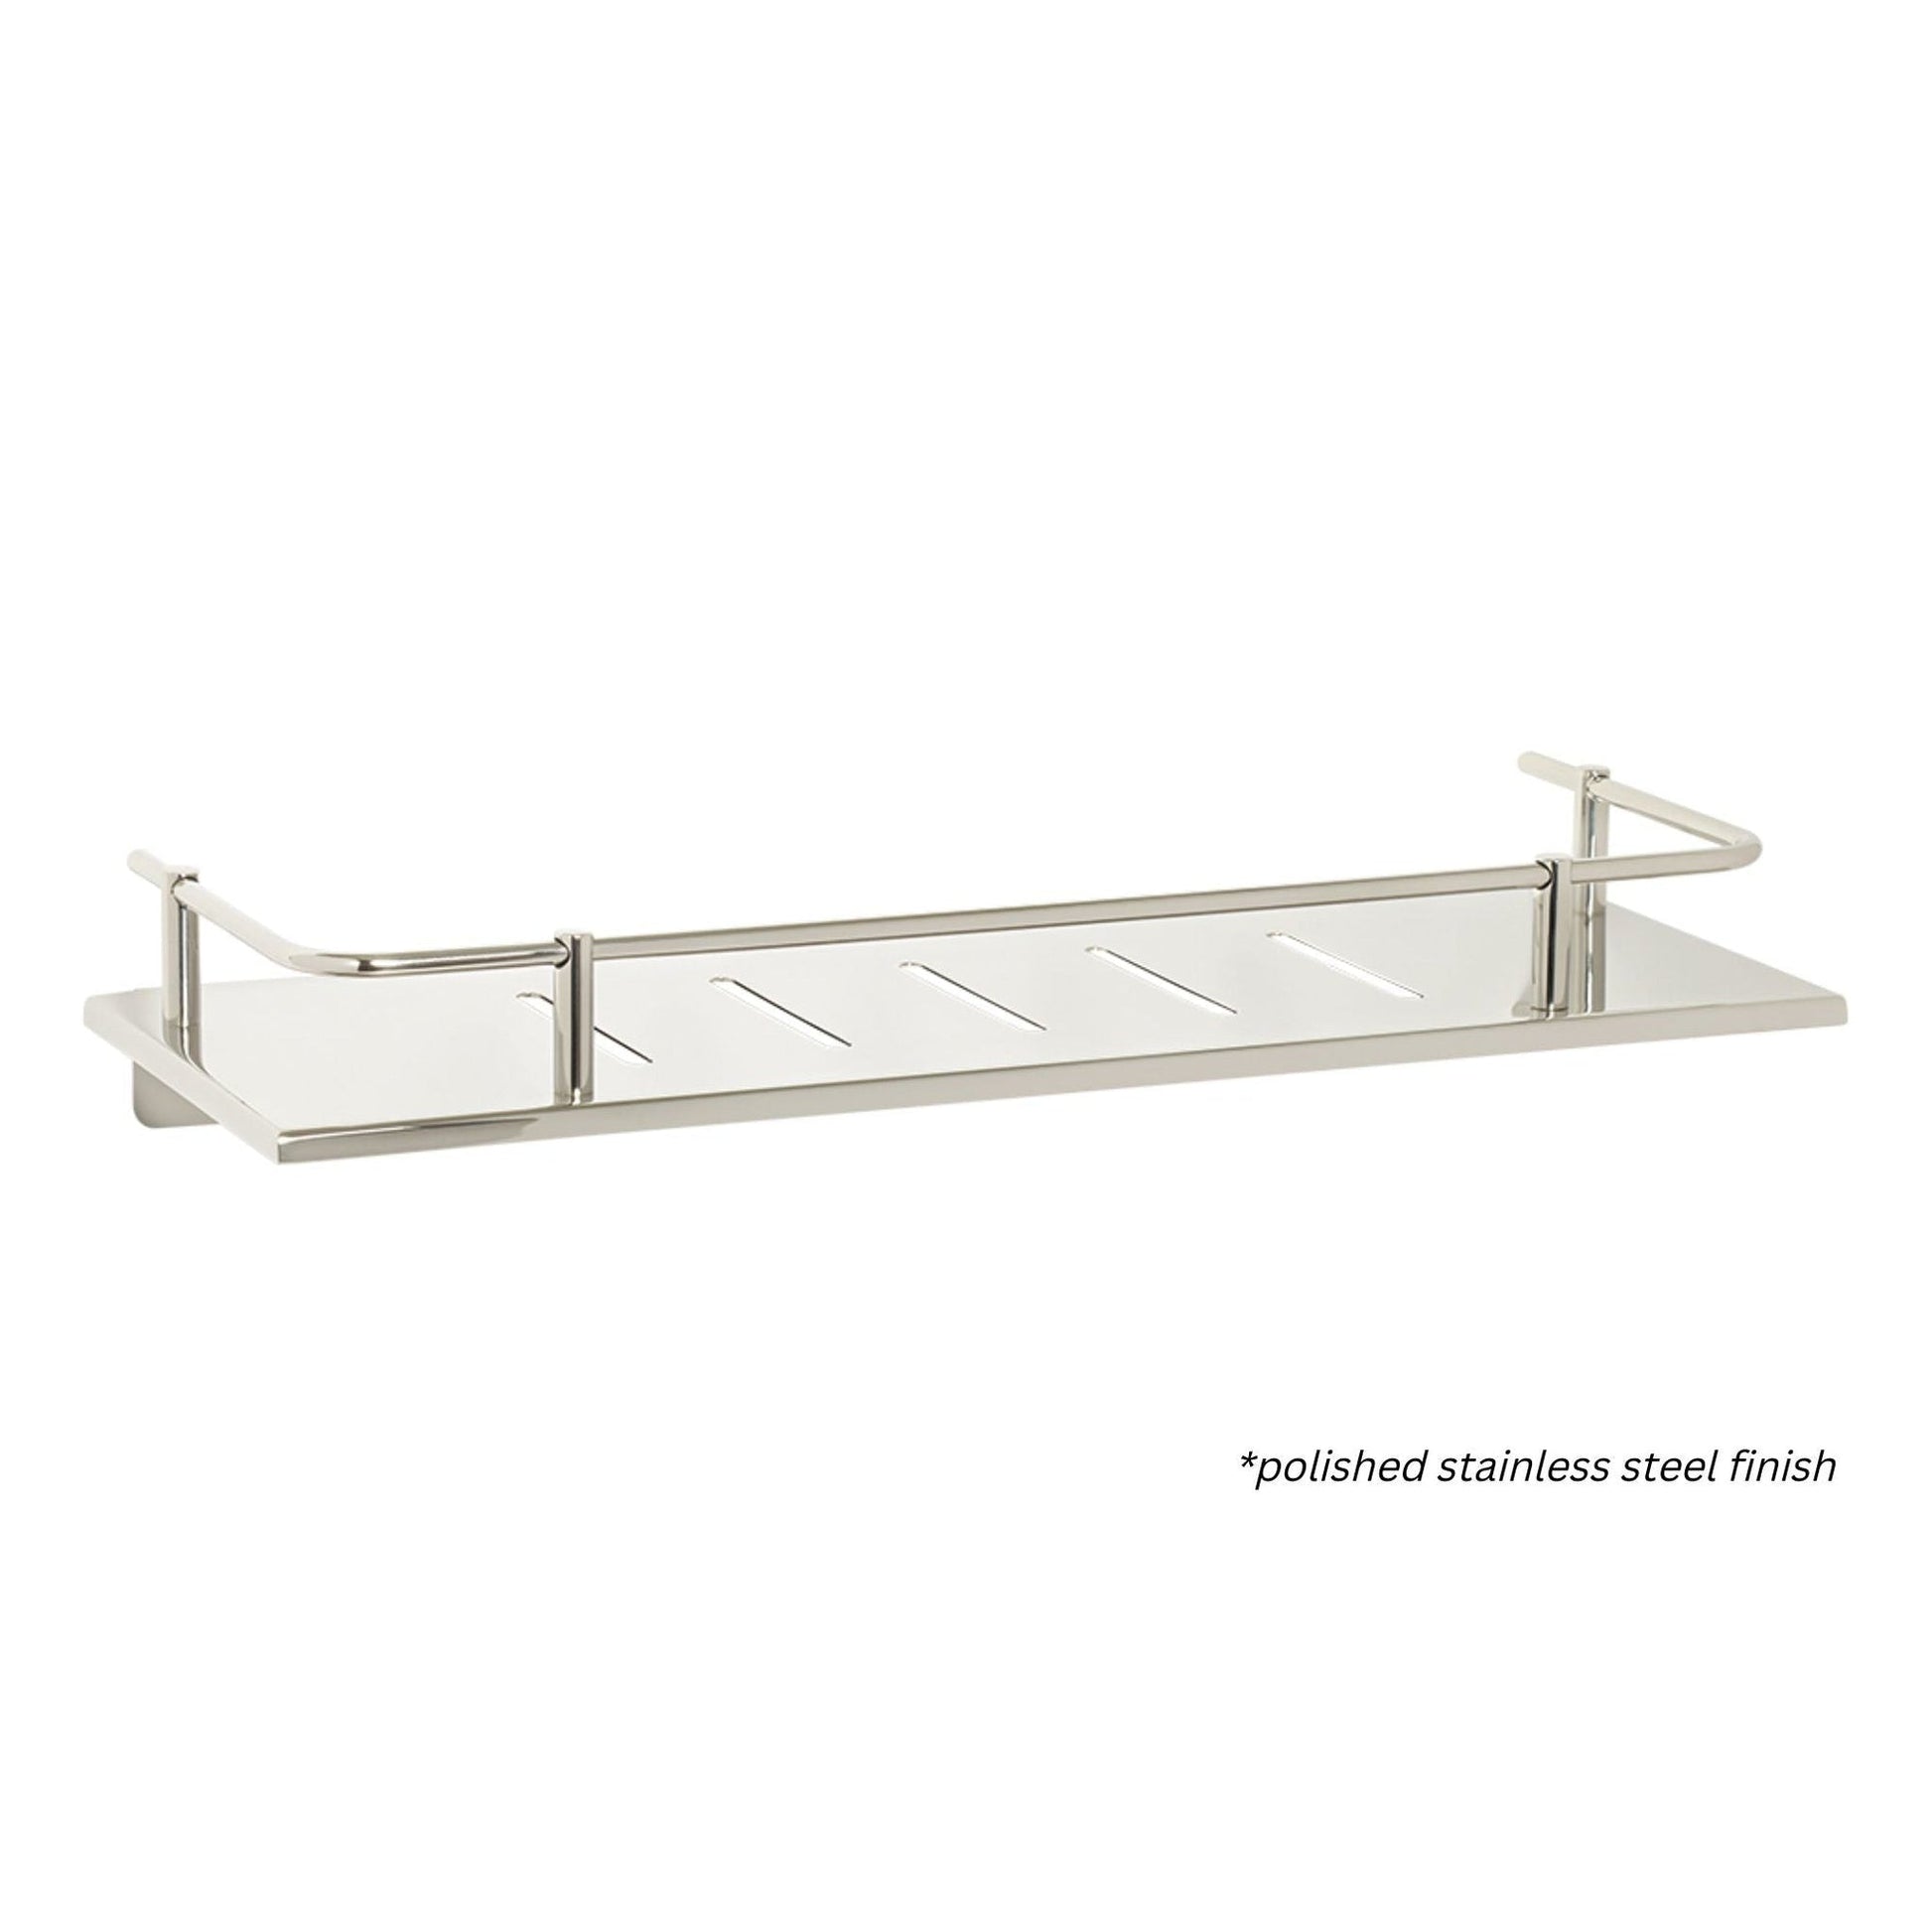 Seachrome Lifestyle and Wellness 720 Series 16" x 6" Rectangular Sundries Shower Shelf With Rail in White Powder Coated Stainless Finish